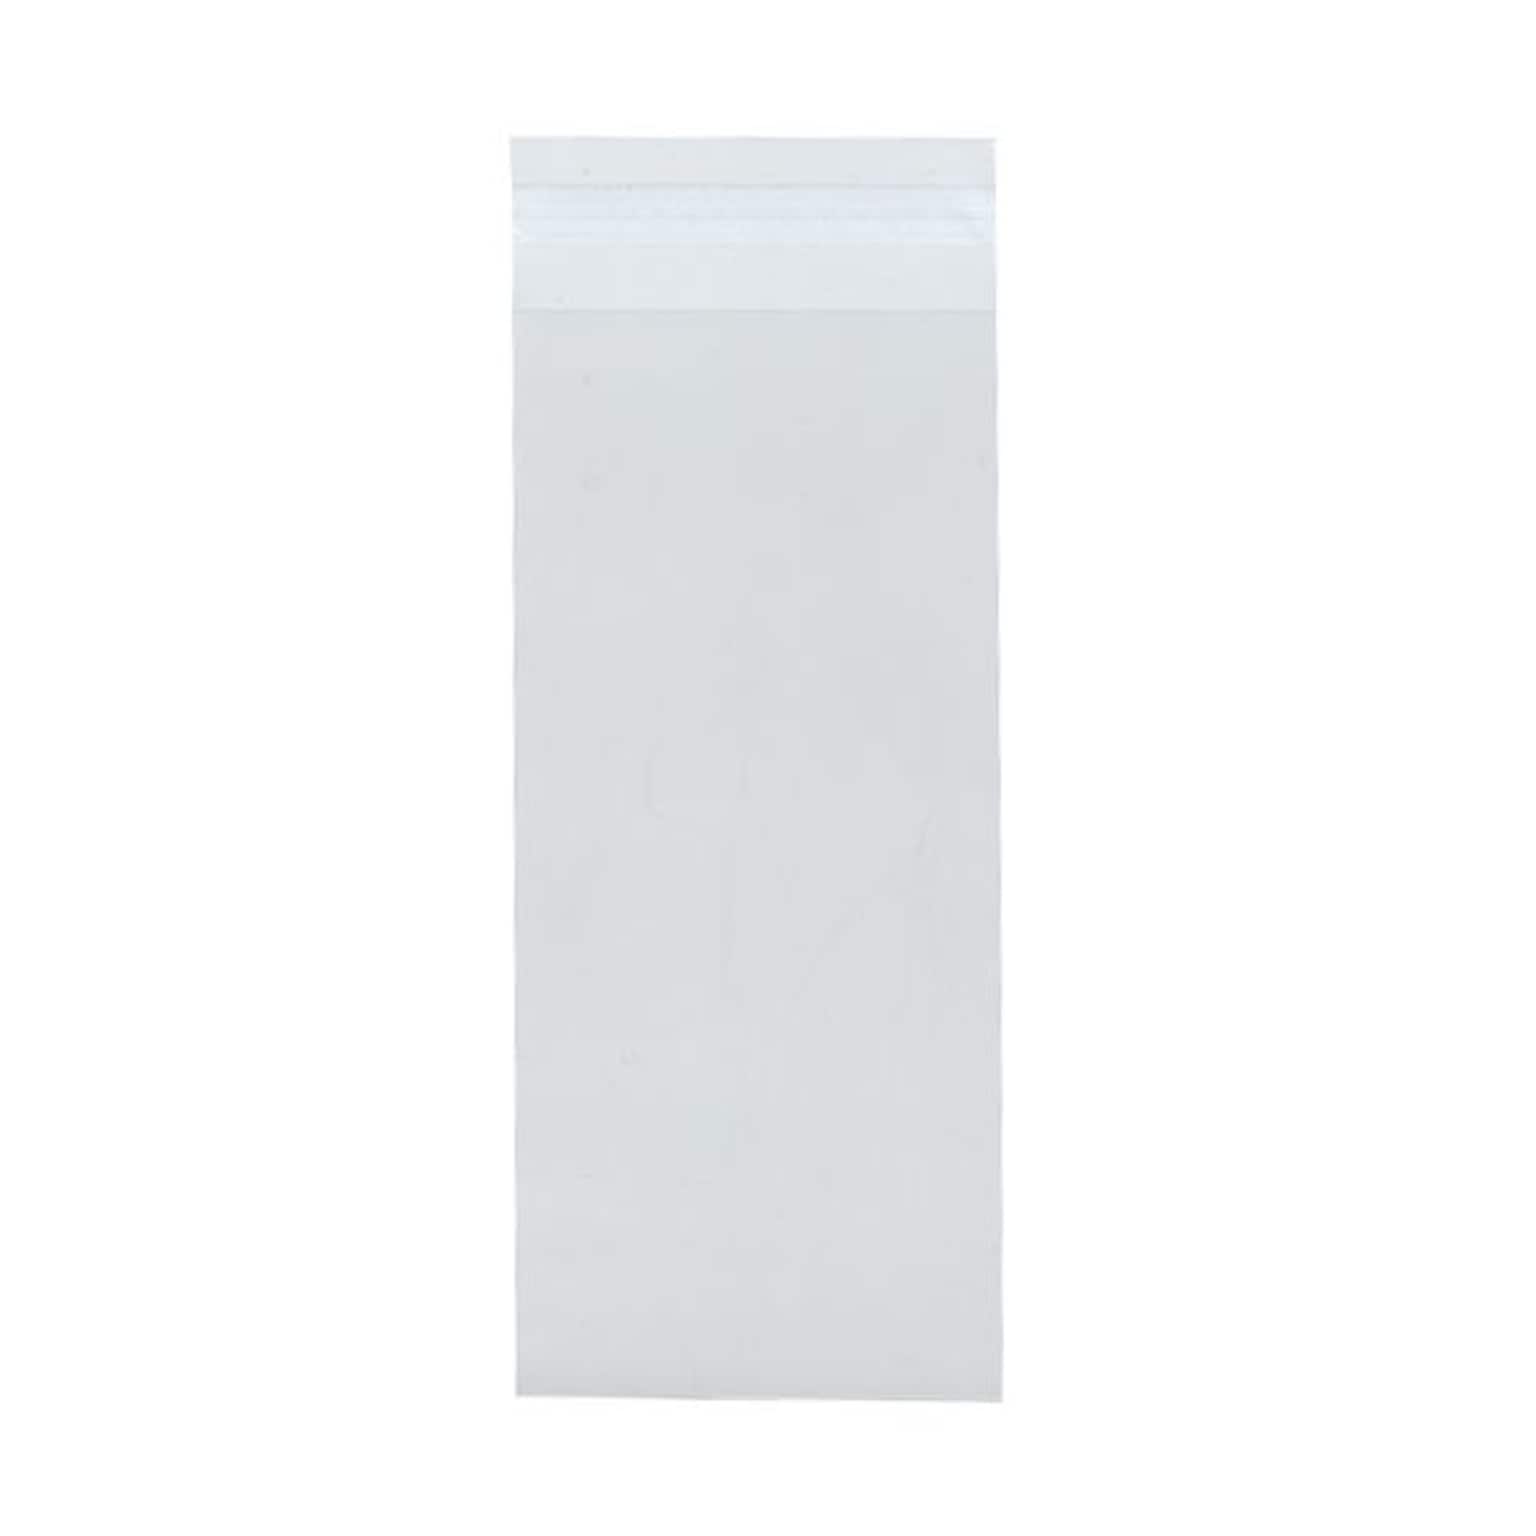 JAM Paper Cello Sleeves with Peel & Seal Closure, #12 Policy, 4.4375 x 12.25, Clear, 100/Pack (NUM12CELLO)